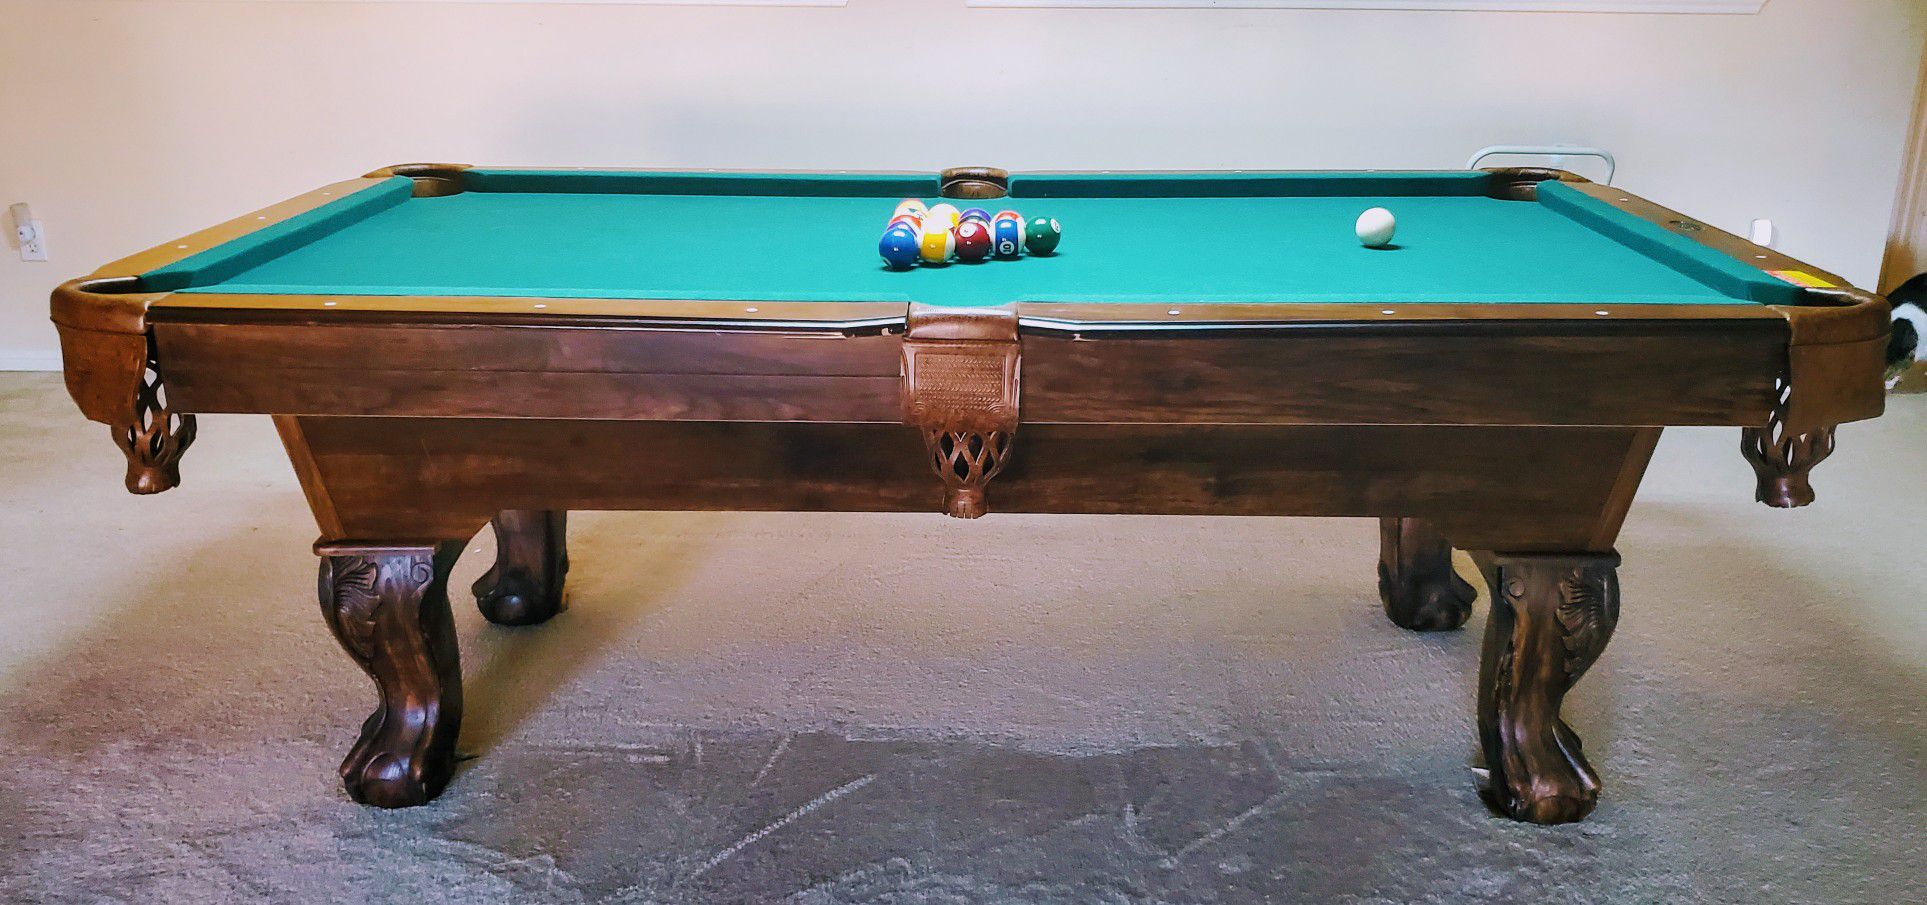 Pool Table, Bud Lite hanging light, Table Cover, Accessory Rack, 4 Pool Sticks, all accessories